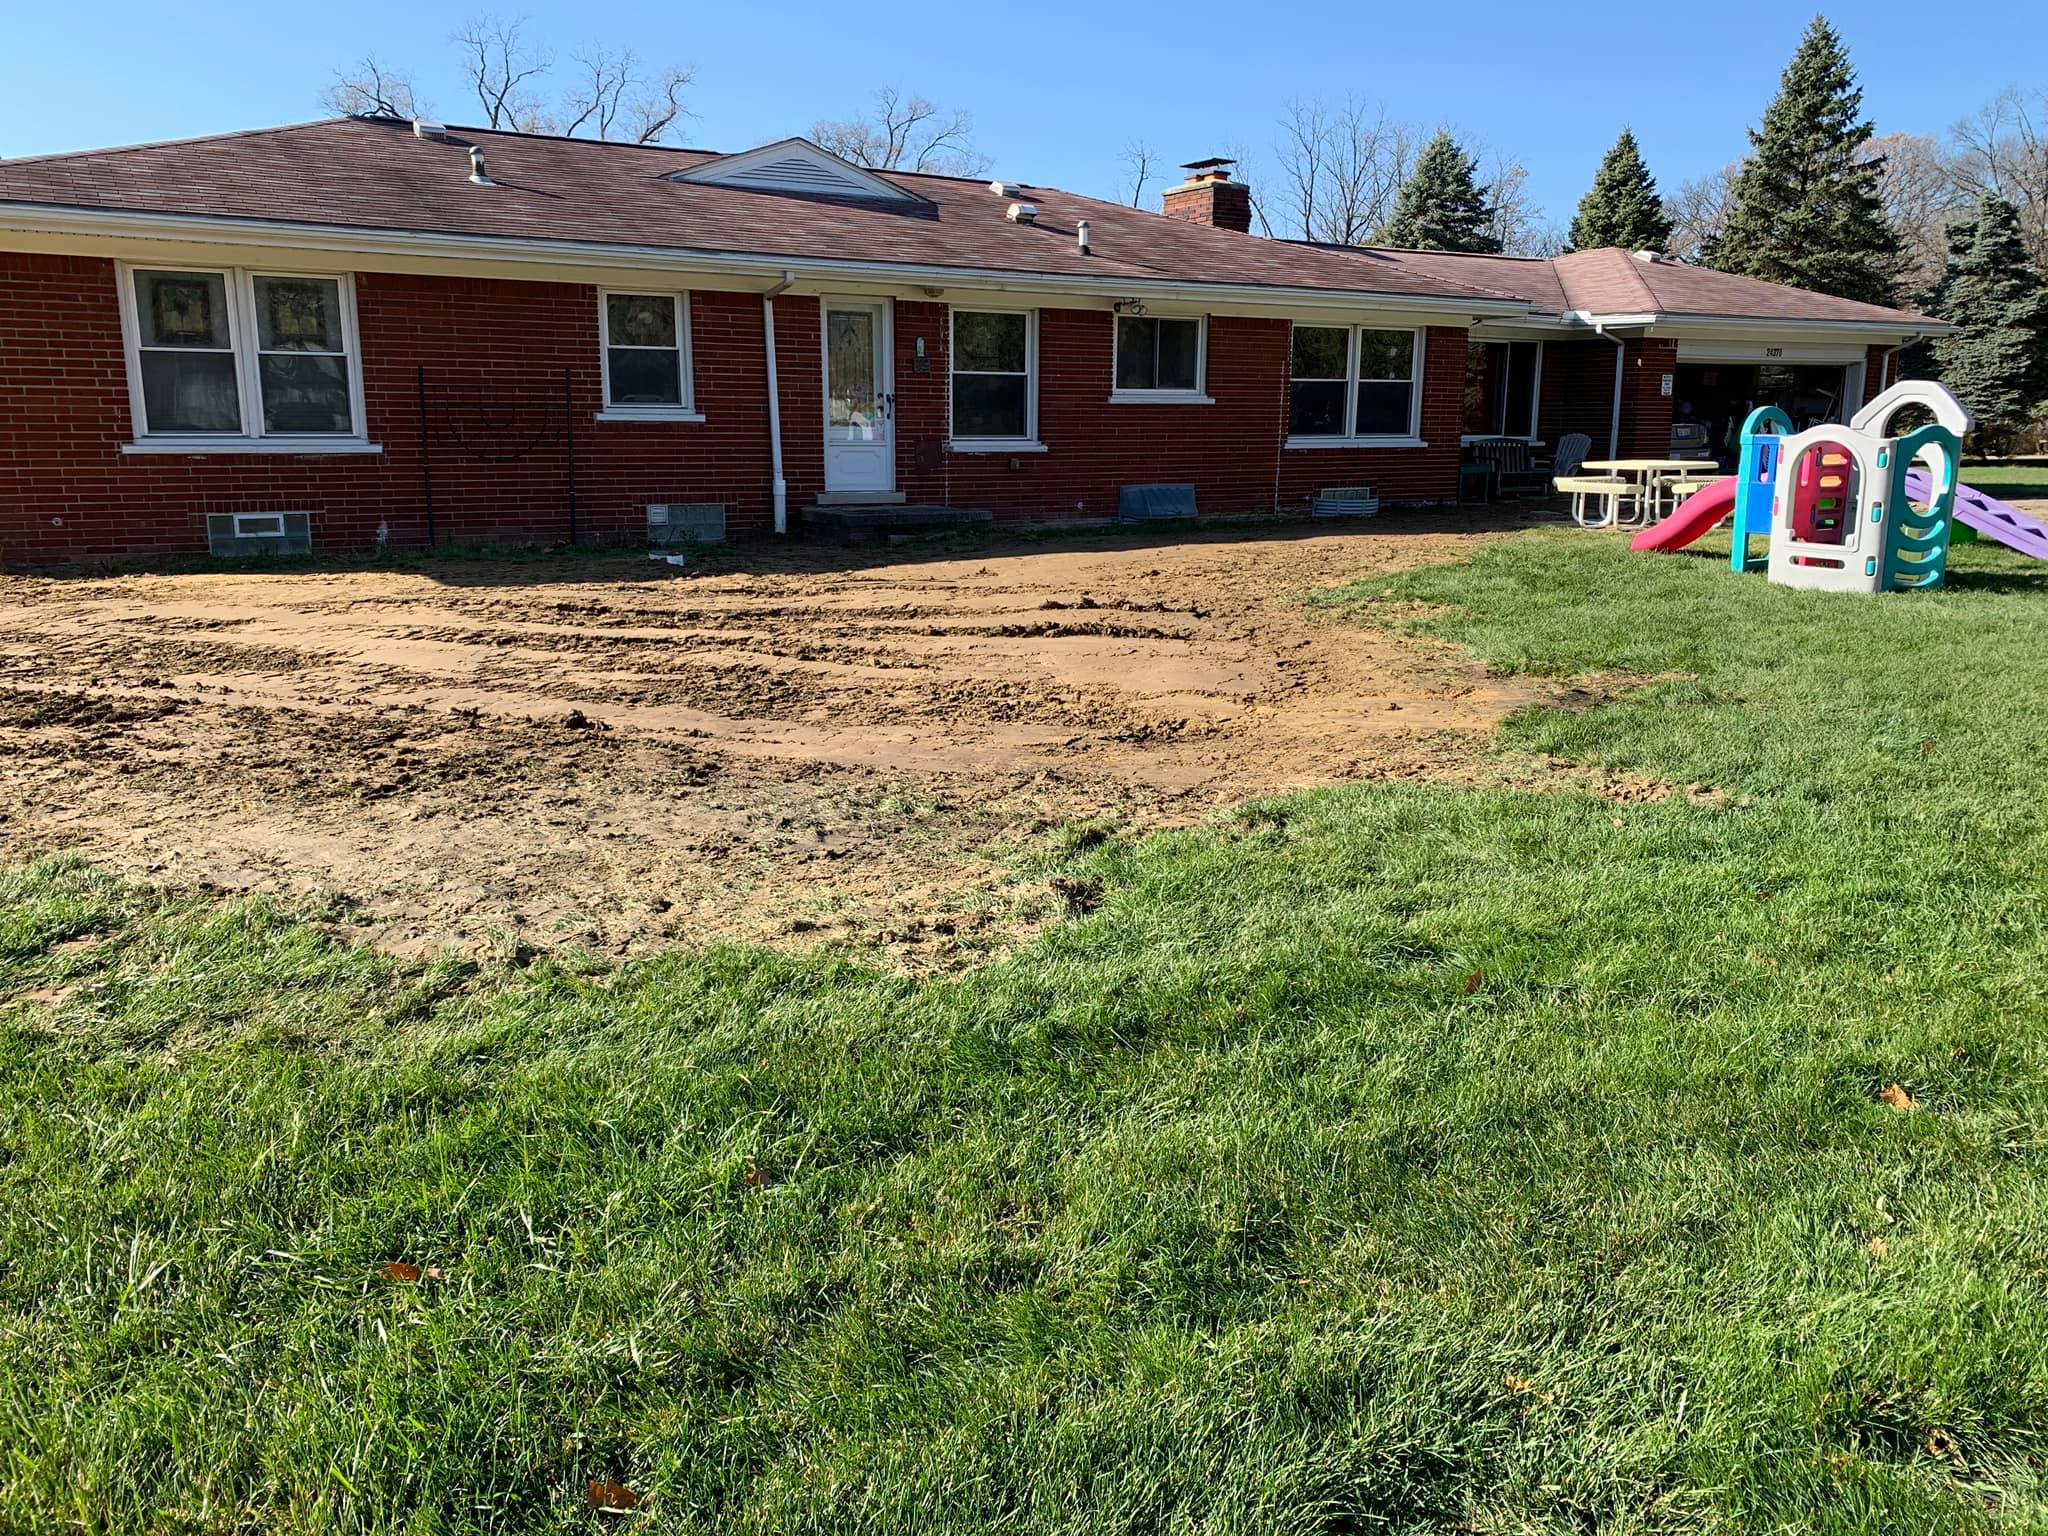 Lawn repair/seeding after Sewer Hookup - Ask Extension